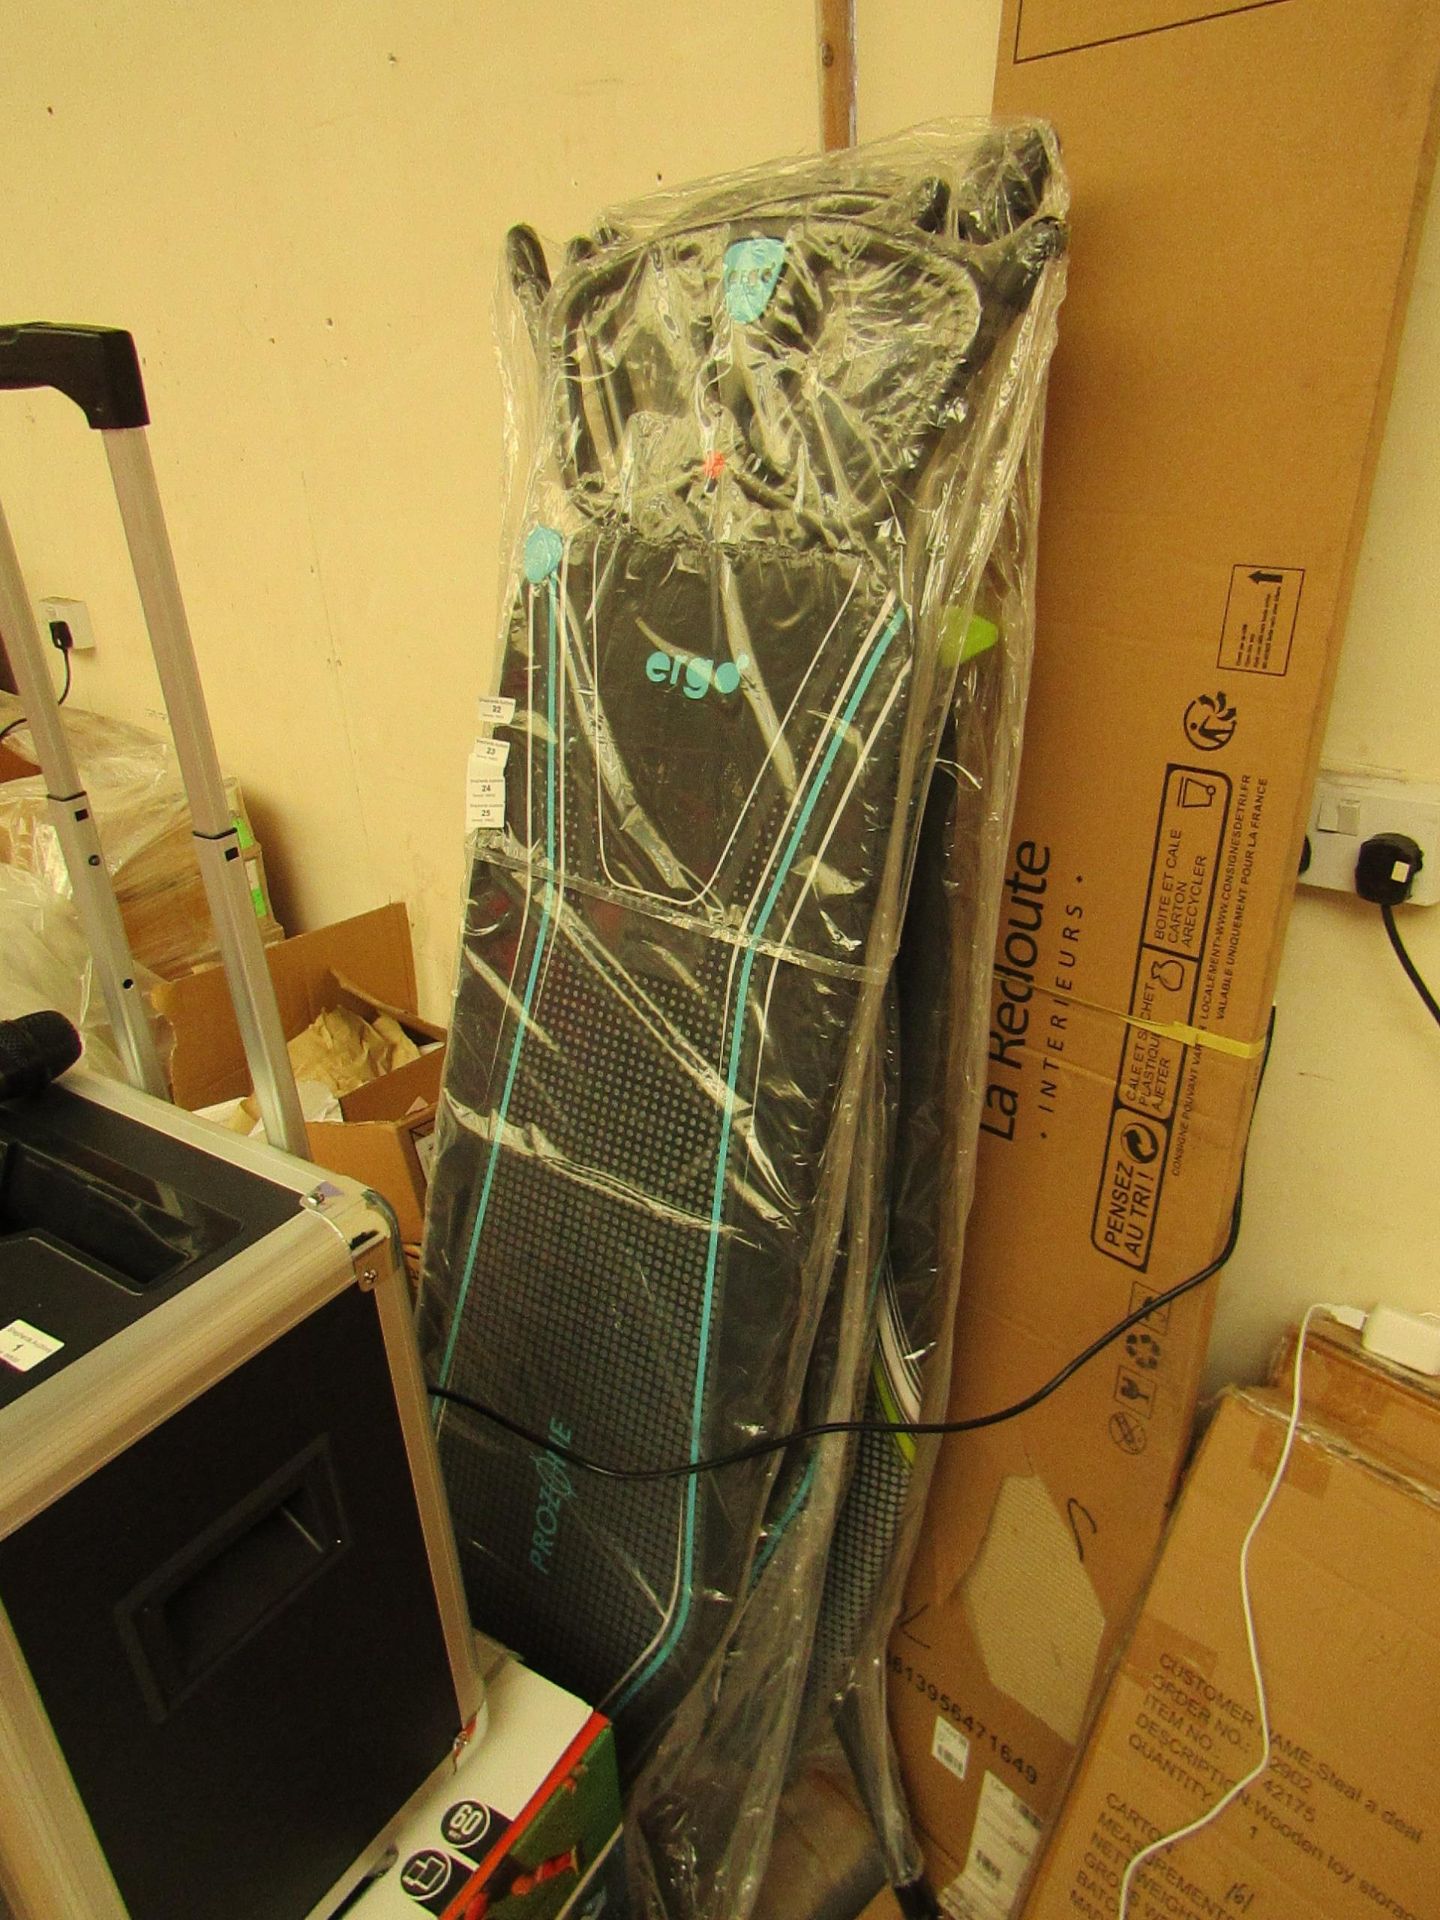 Ergo - Ironing Board - Unchecked & Packaged.